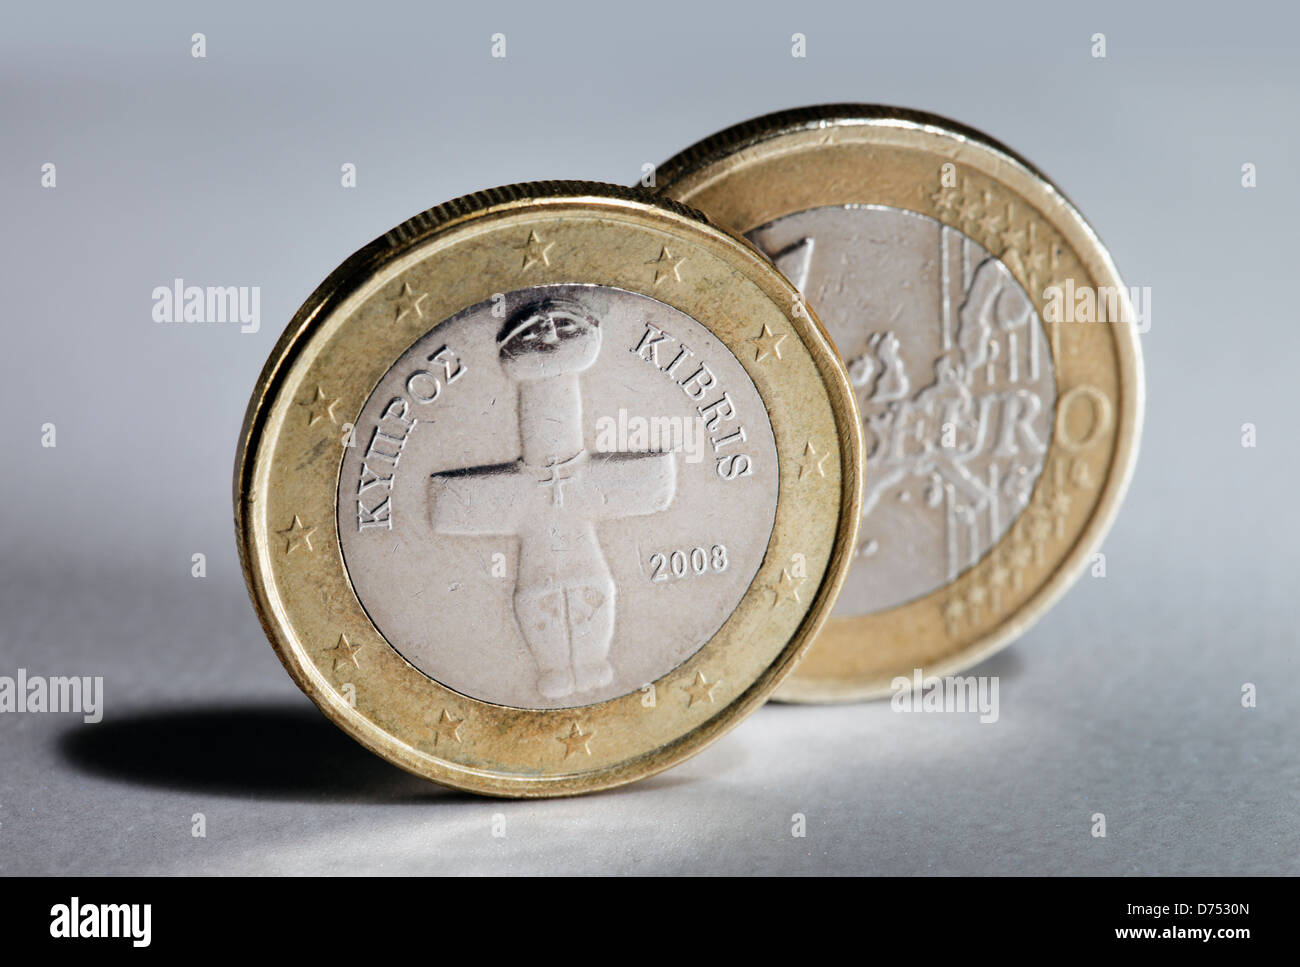 Two 1 Euro coins from Cyprus. Stock Photo